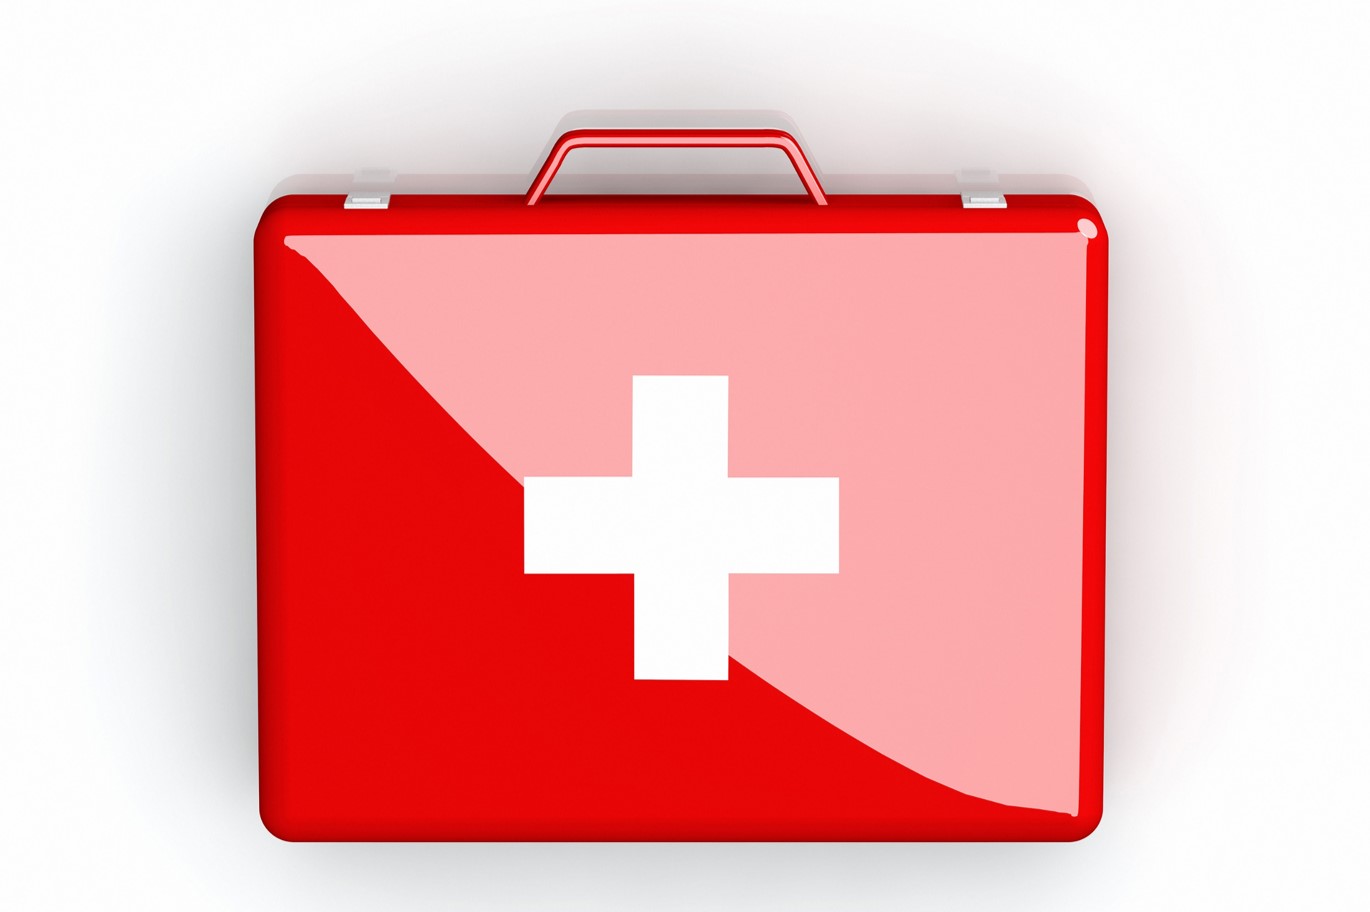 stock photo of a first aid kit